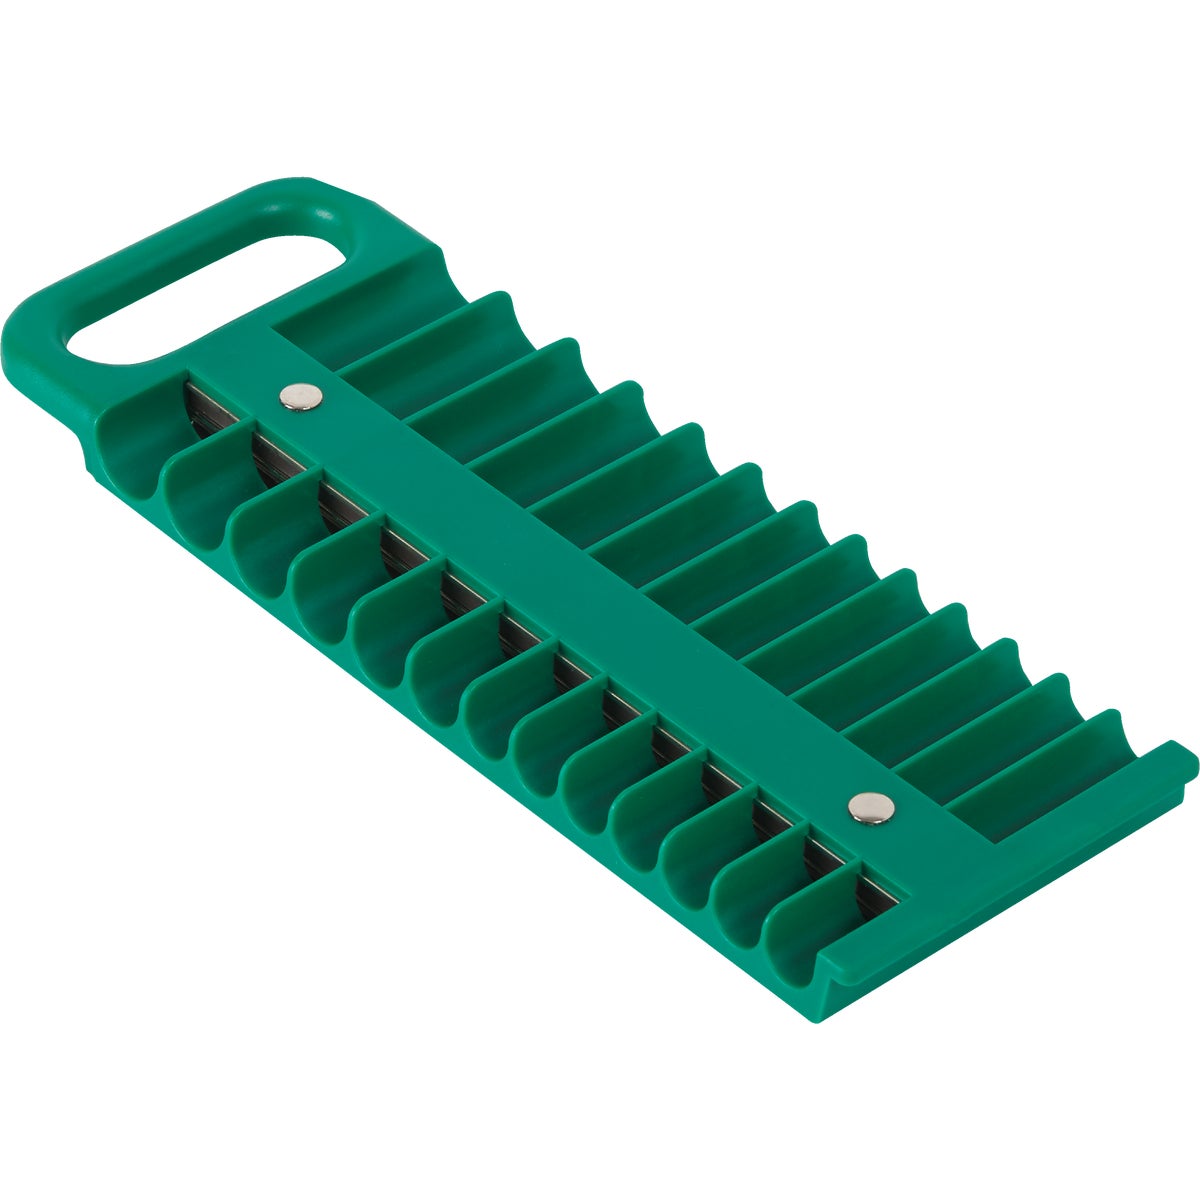 Channellock 1/4 In. Plastic Socket Holder Tray with Magnetic Holder and Back